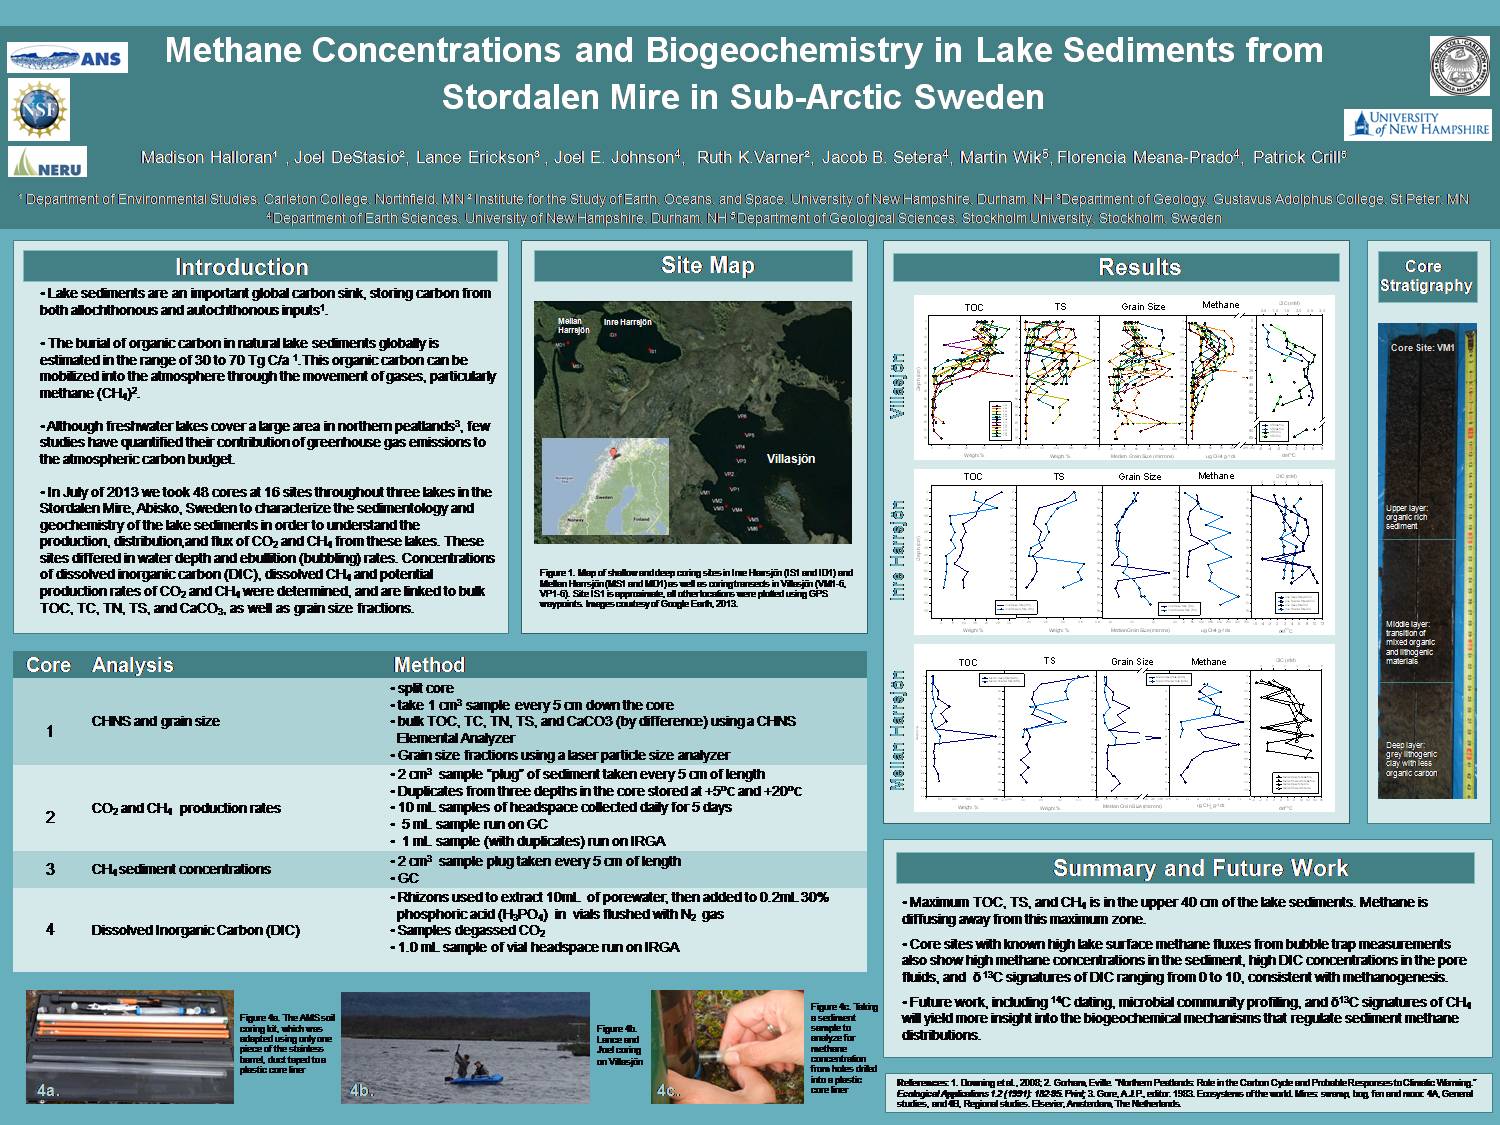 Methane Concentrations And Biogeochemistry In Lake Sediments From Stordalen Mire In Sub-Arctic Sweden (Final Draft) by halloram